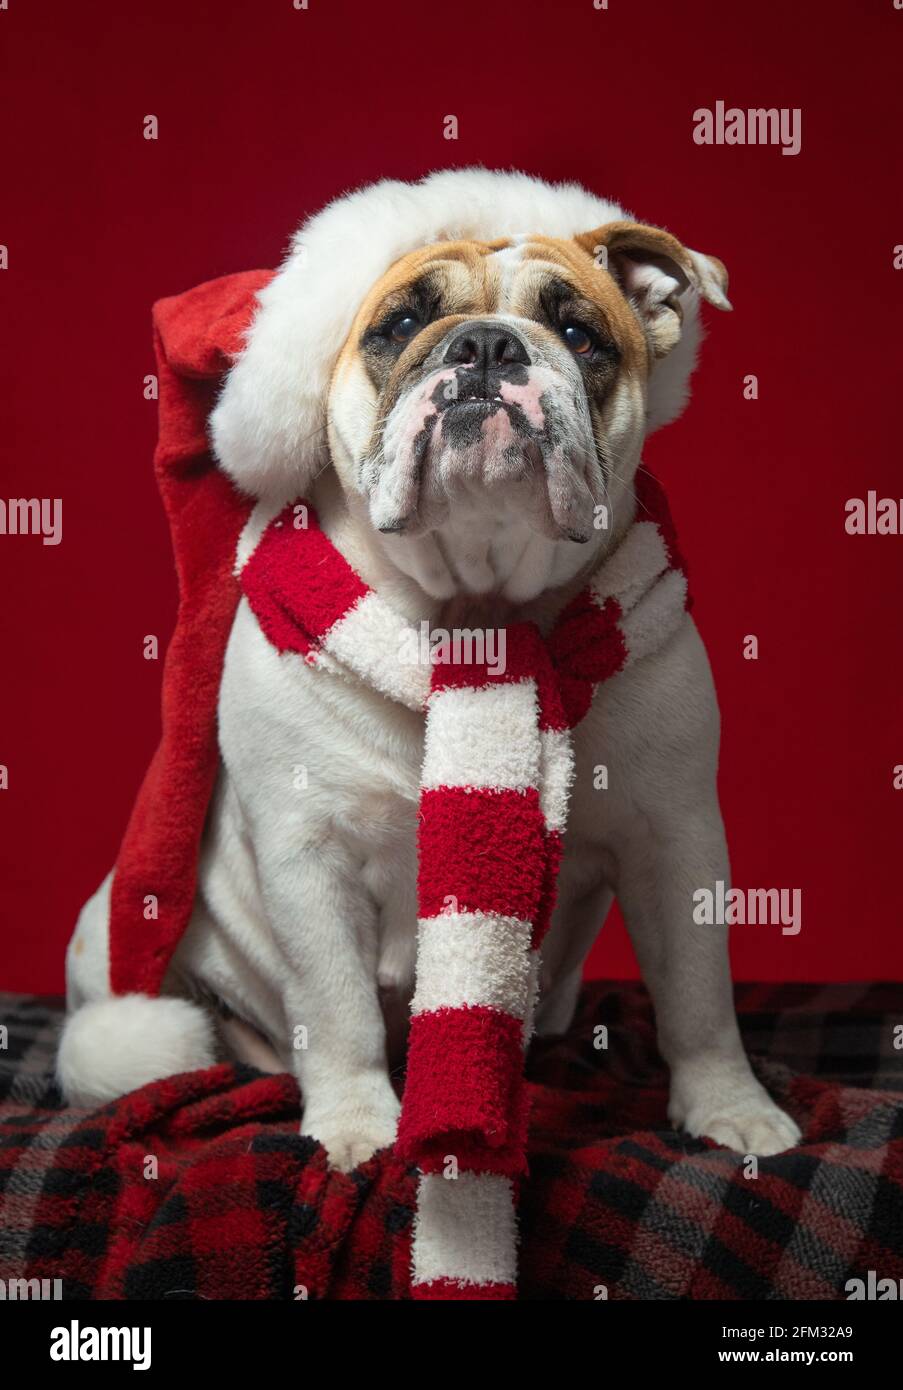 Portrait of an English bulldog wearing a Santa hat and striped scarf Stock Photo